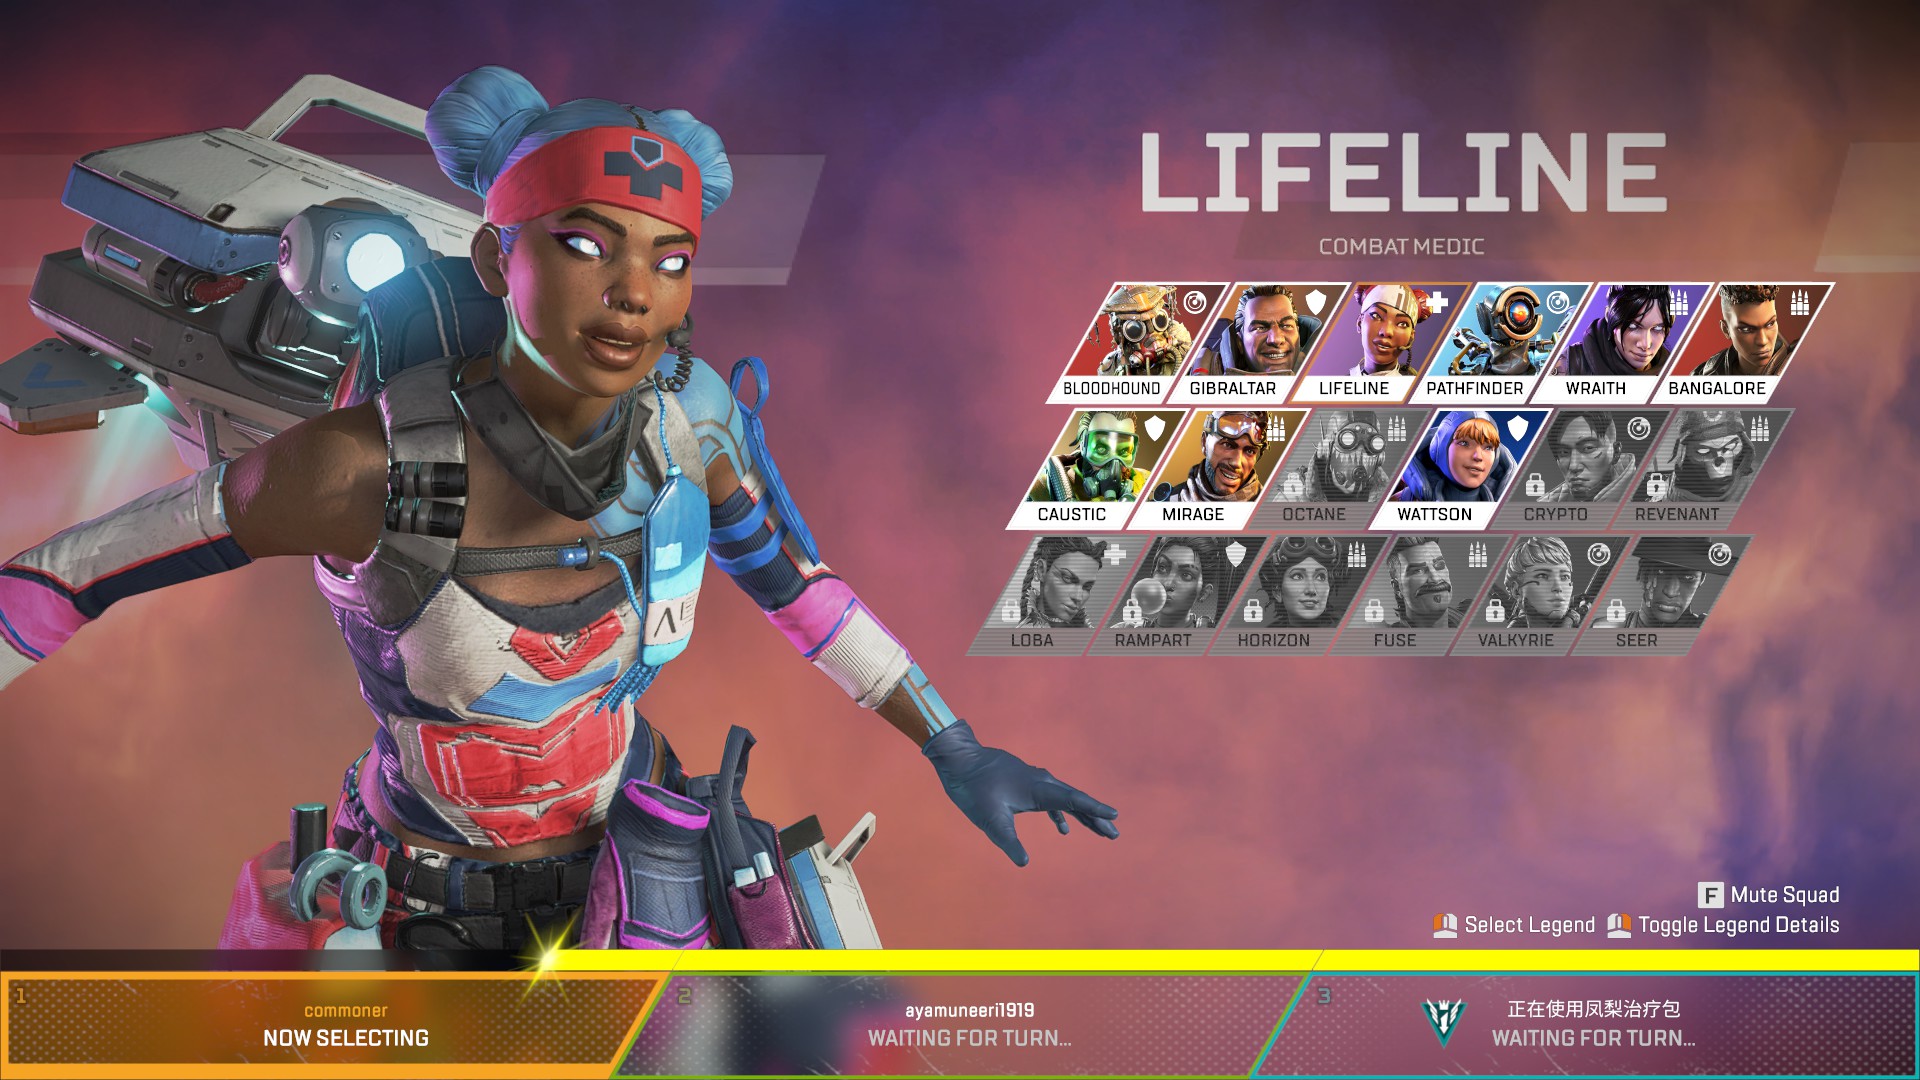 How to Play as Lifeline in Apex Legends (Season 11)